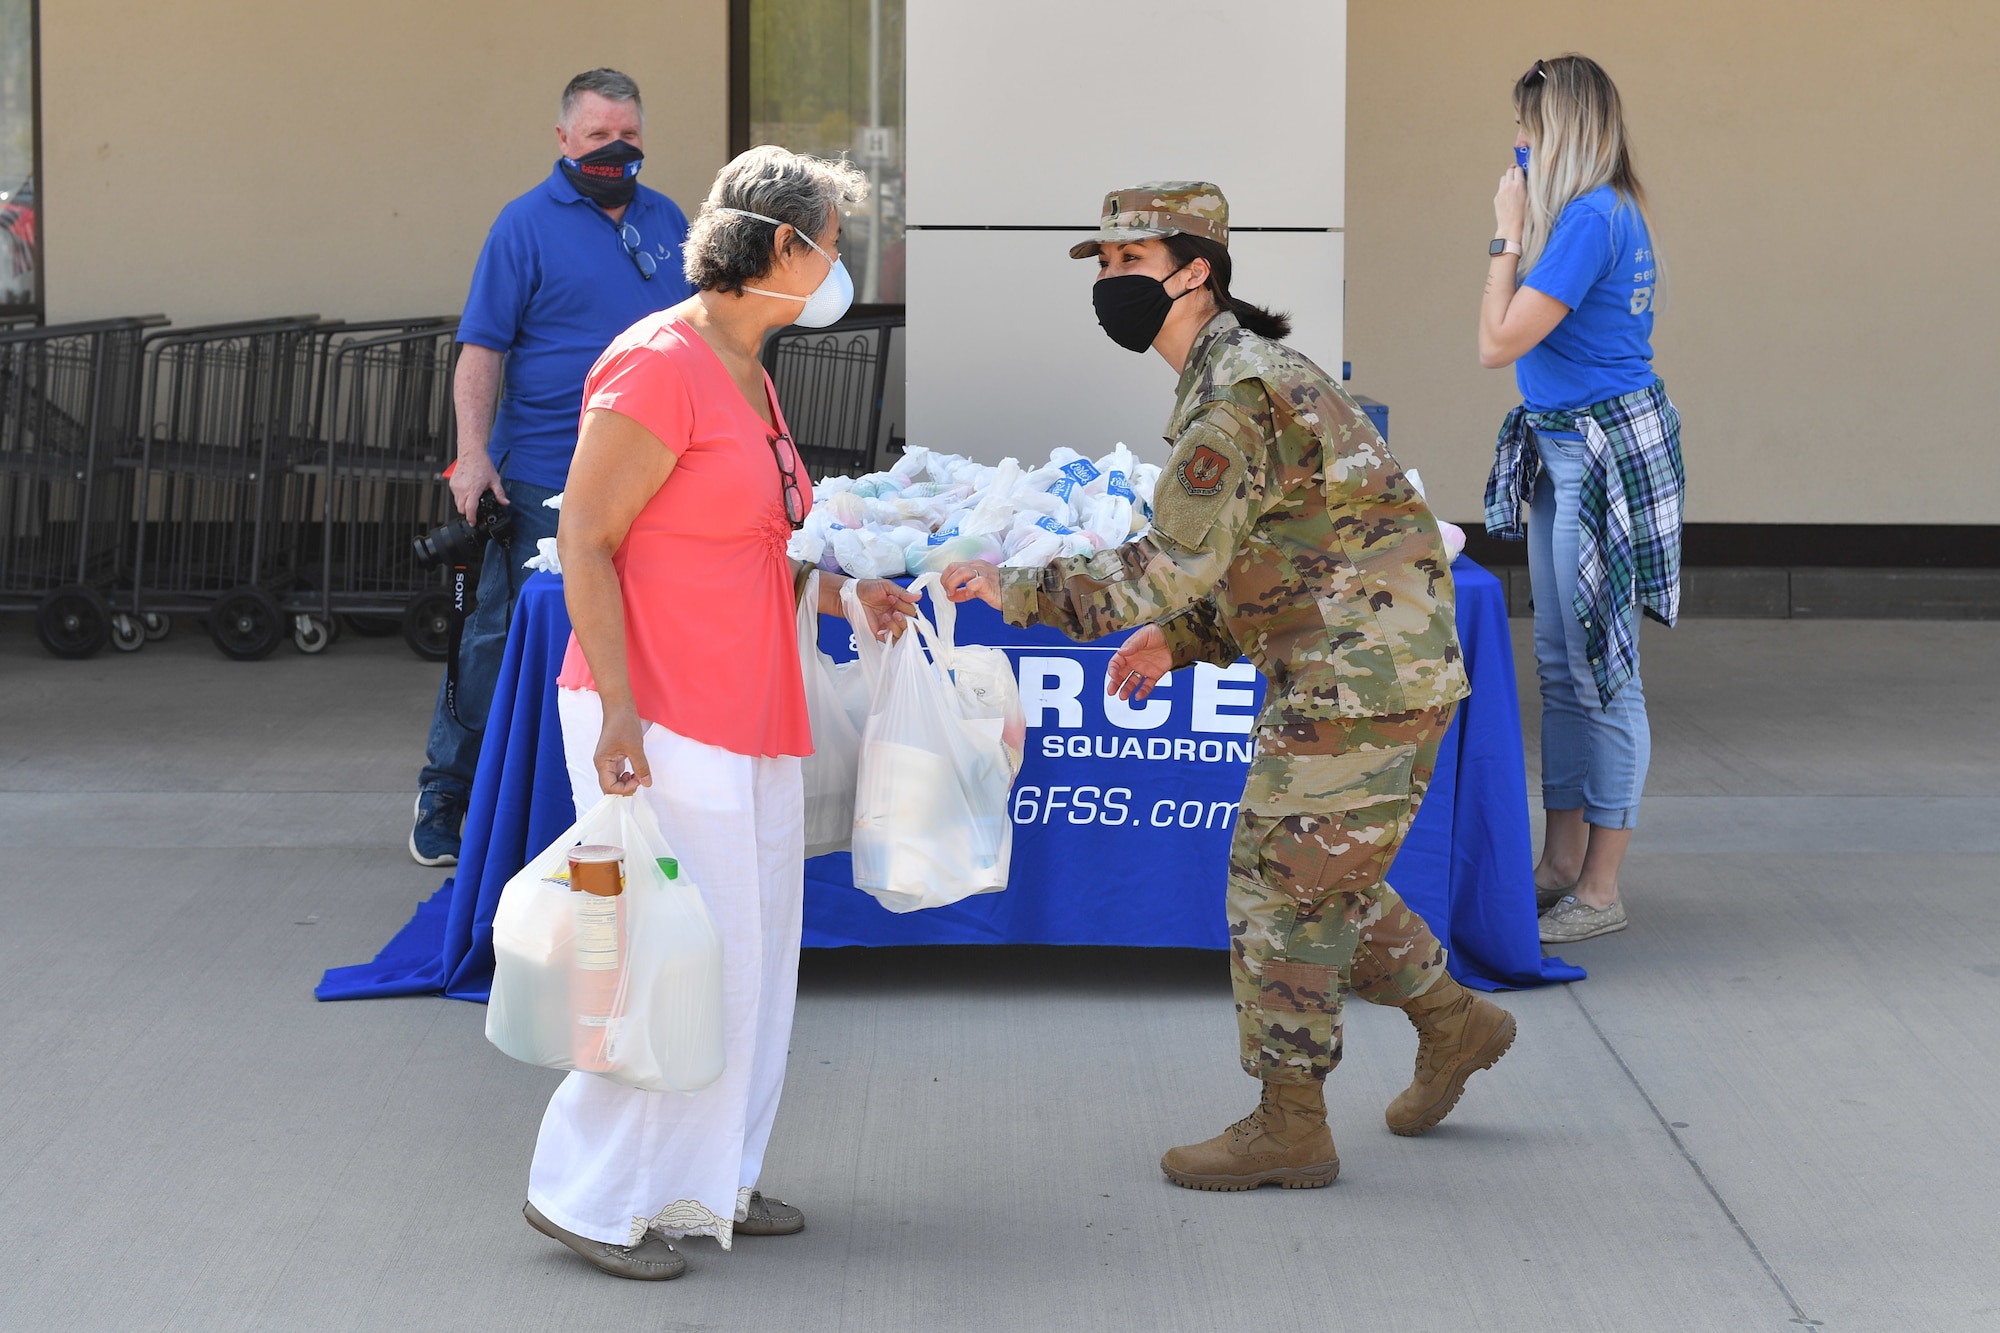 An Airman hands an Easter bag to an individual outside of the commissary.